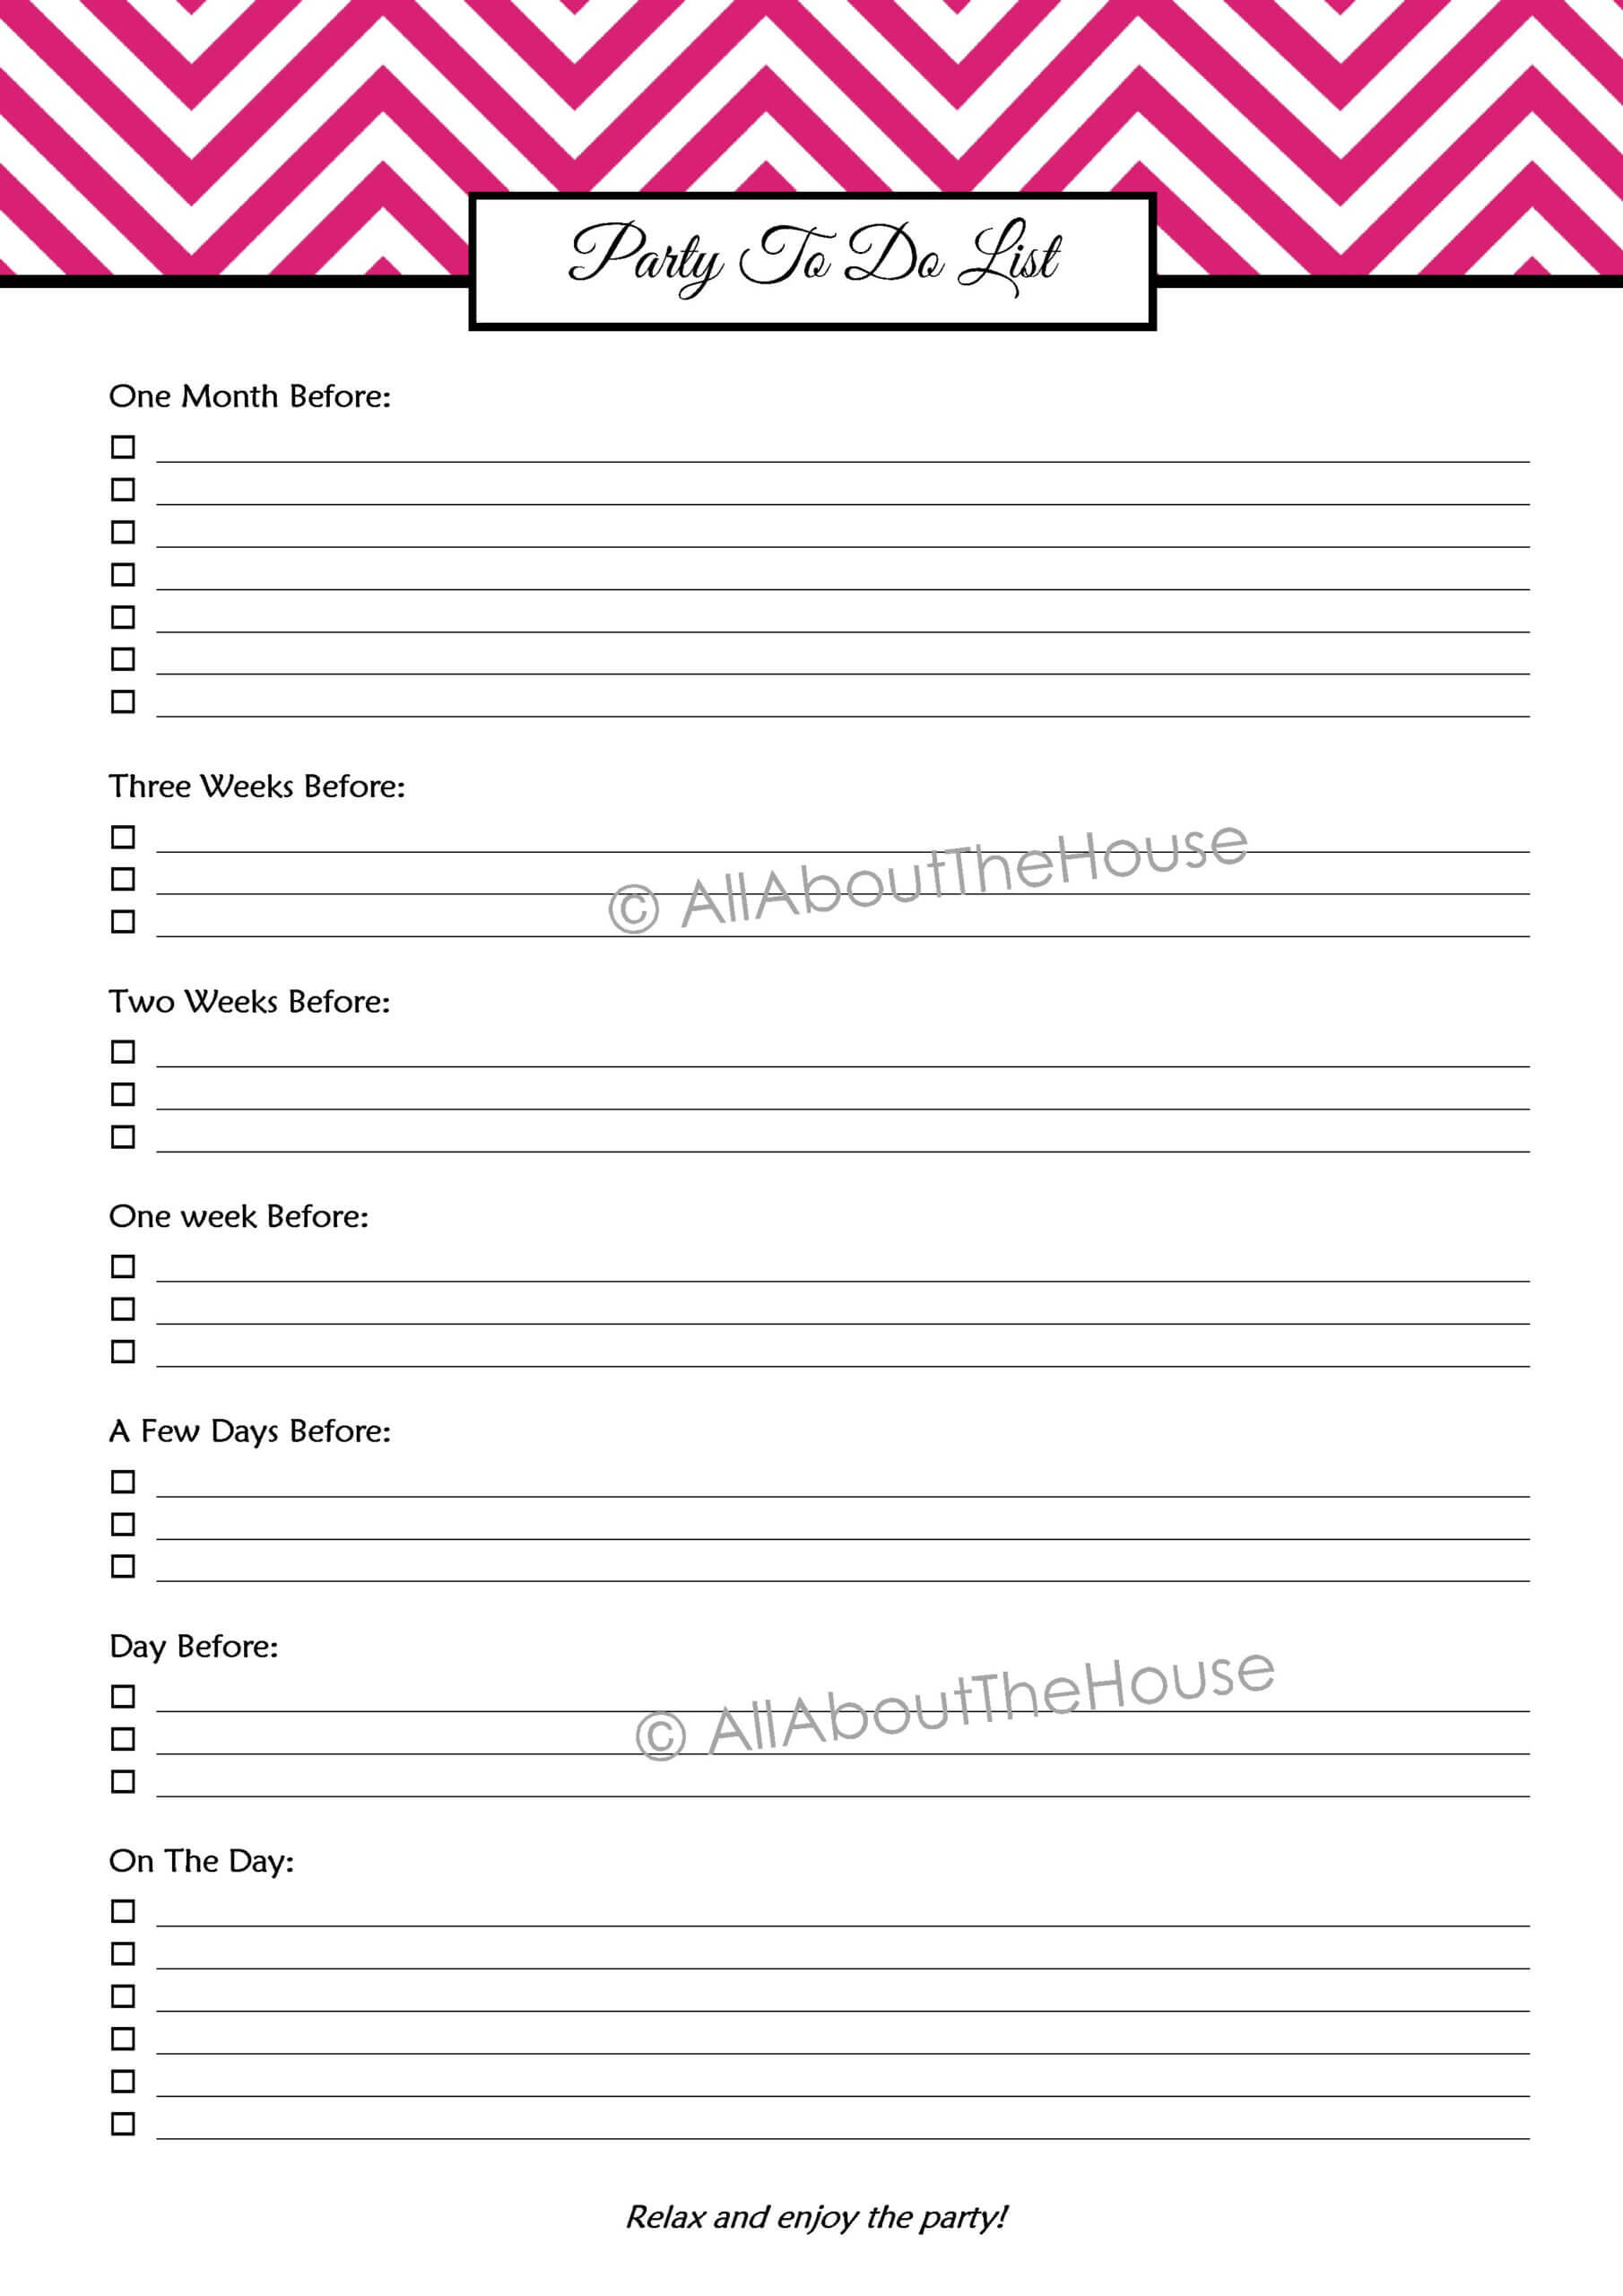 Blank Checklist Template Word 2010 | Free Cover Letter Templates Throughout Blank Checklist Template Word